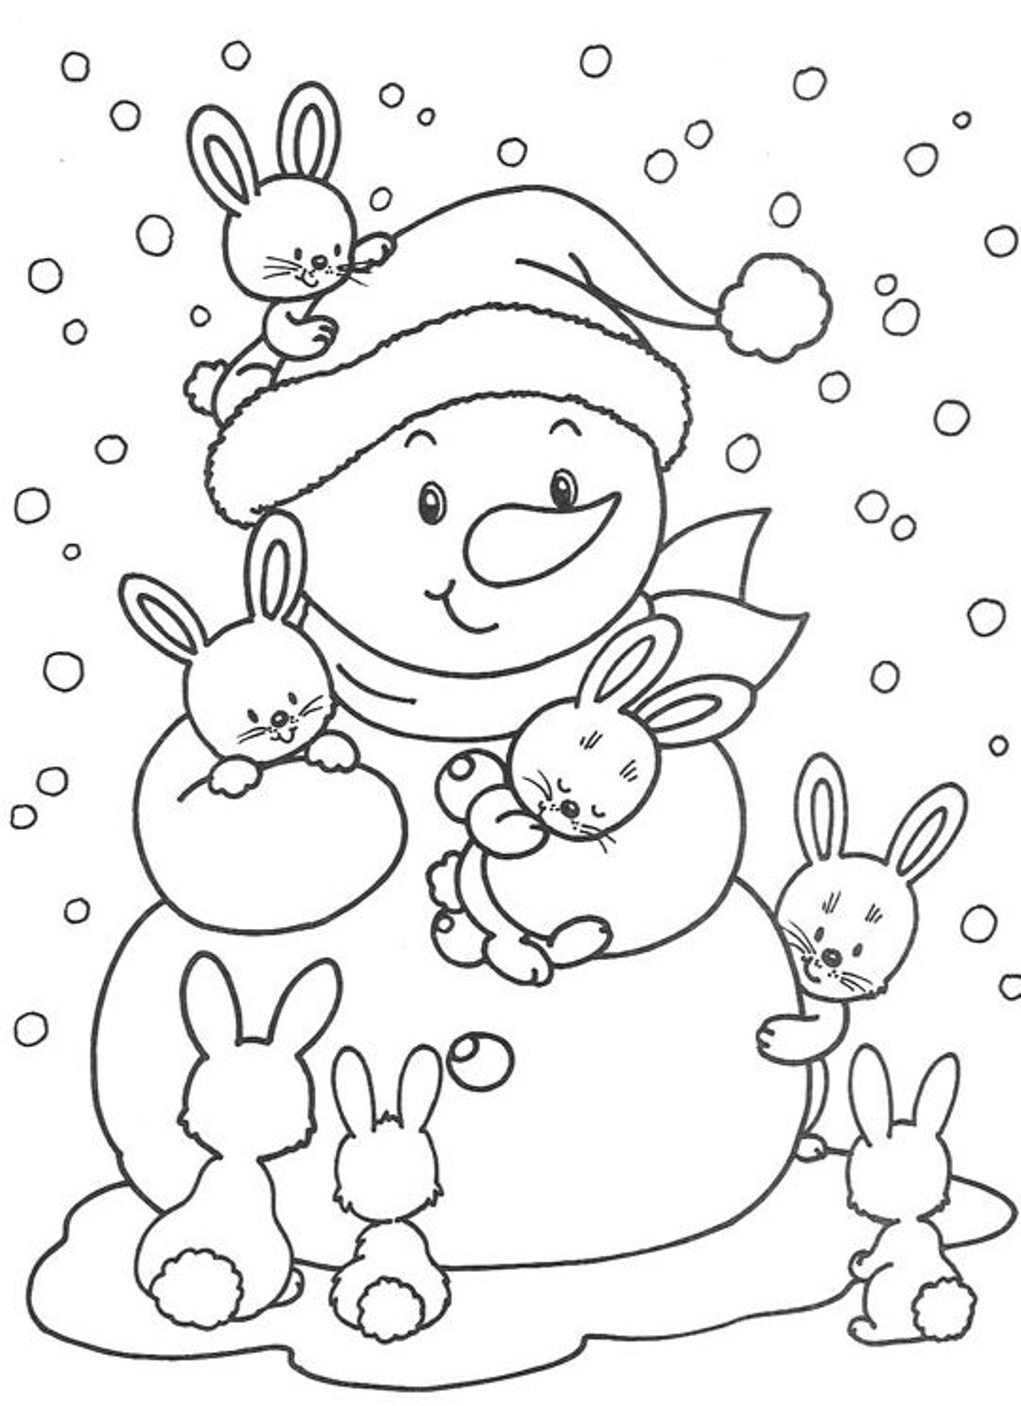 Coloring page: Winter season (Nature) #164411 - Free Printable Coloring Pages